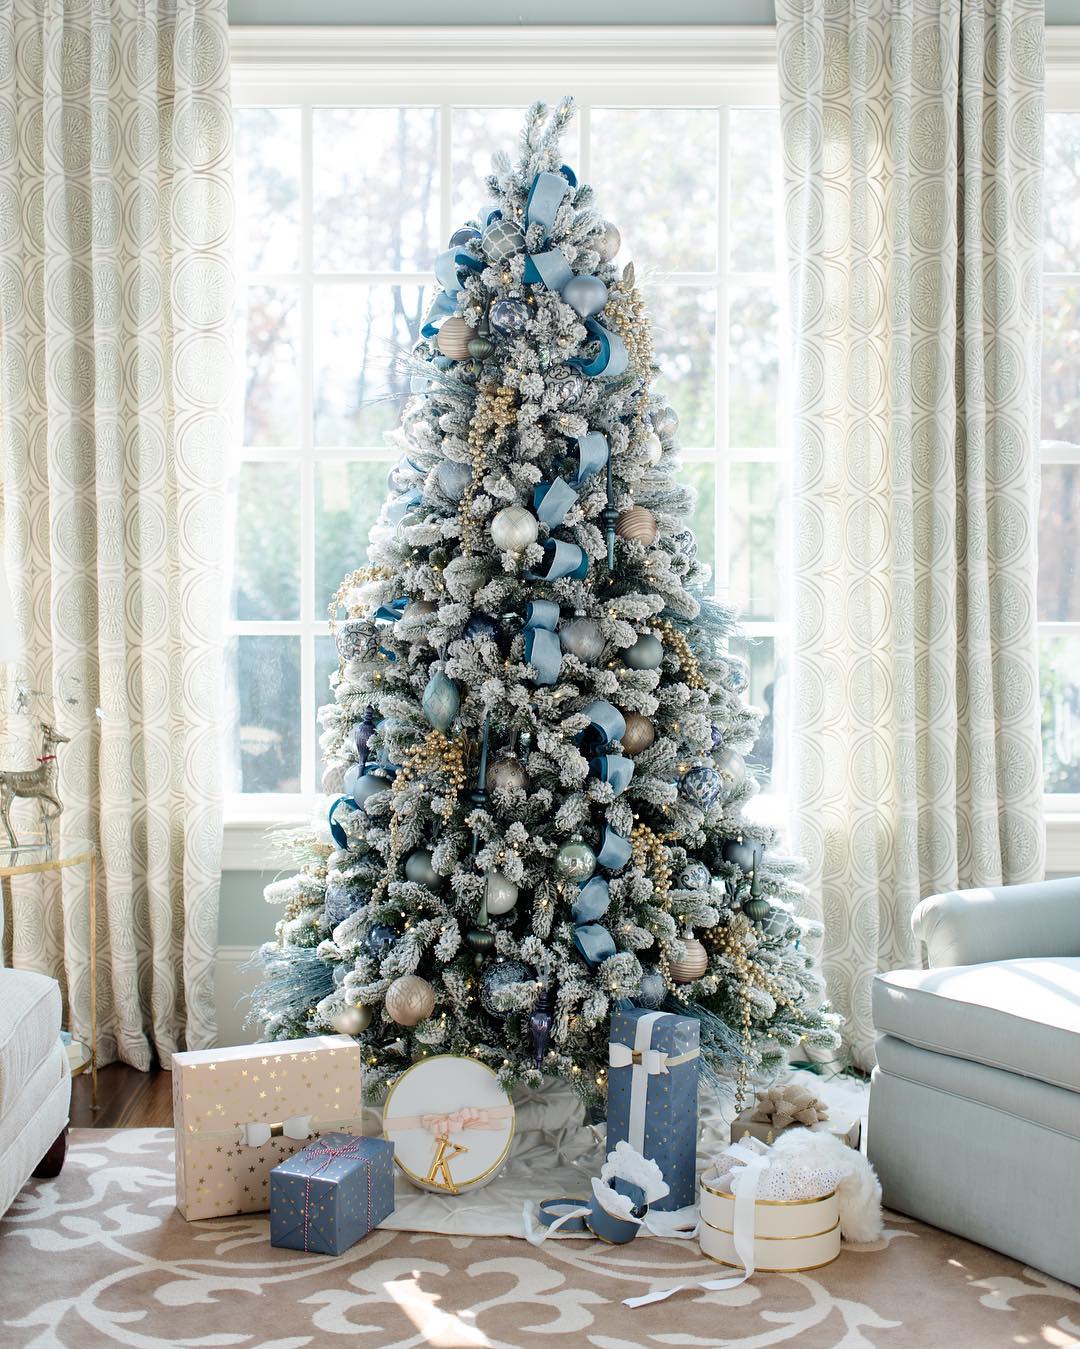 Decorated Christmas Tree in Very Clean, Minimalist Living Room. Photo by Instagram user @bluegraygal